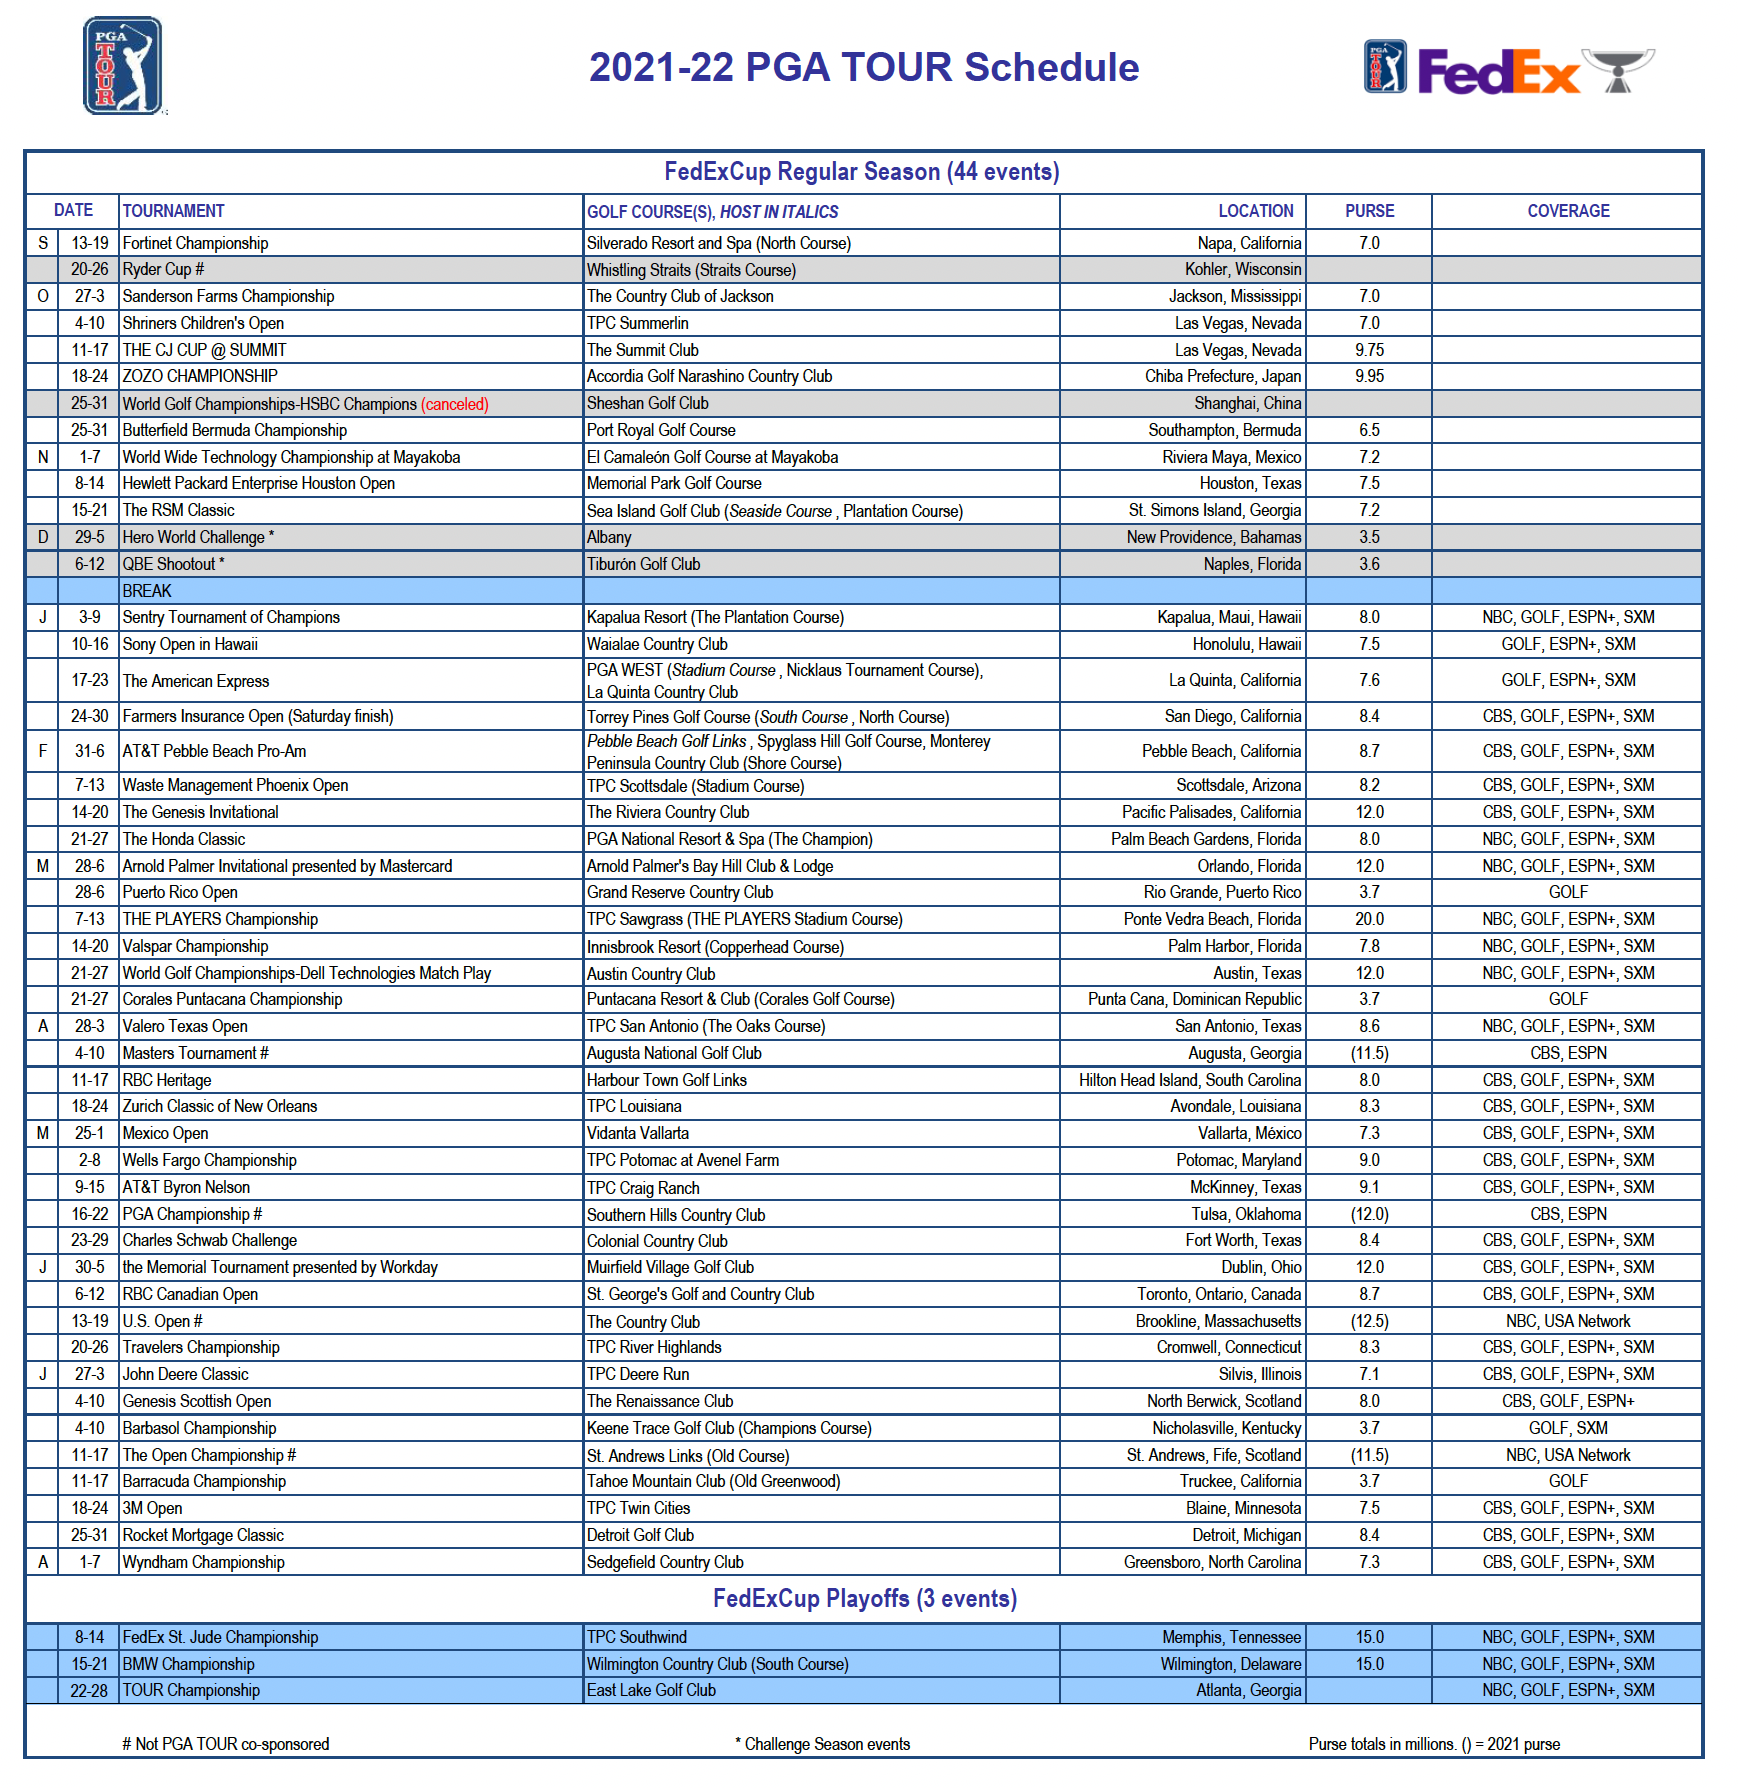 Pga Calendar 2022 2022 Pga Tour Broadcast Schedule: Cbs Goes International, Nbc Gets The  Playoffs, Espn+ To Have Four Daily Live Streams — Geoff Shackelford